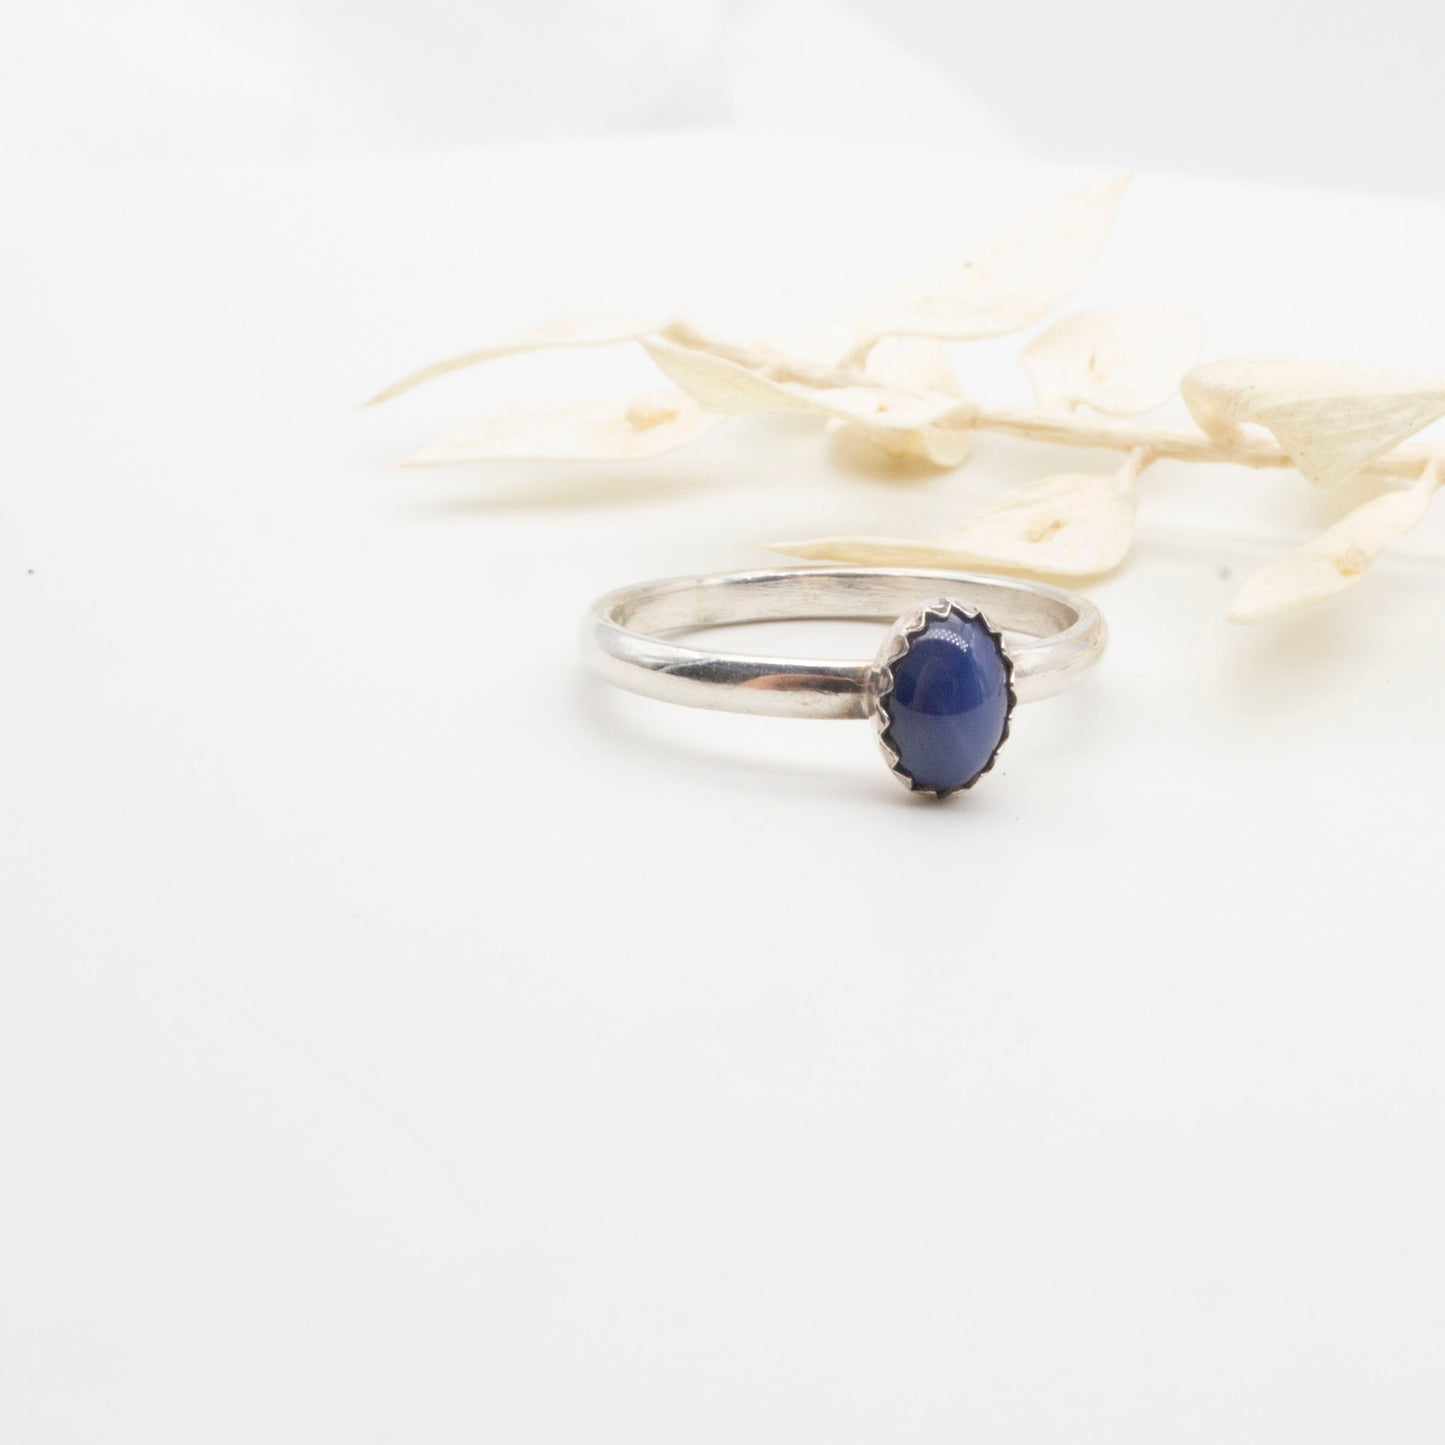 Synth star sapphire cabochon ring size Q1/2